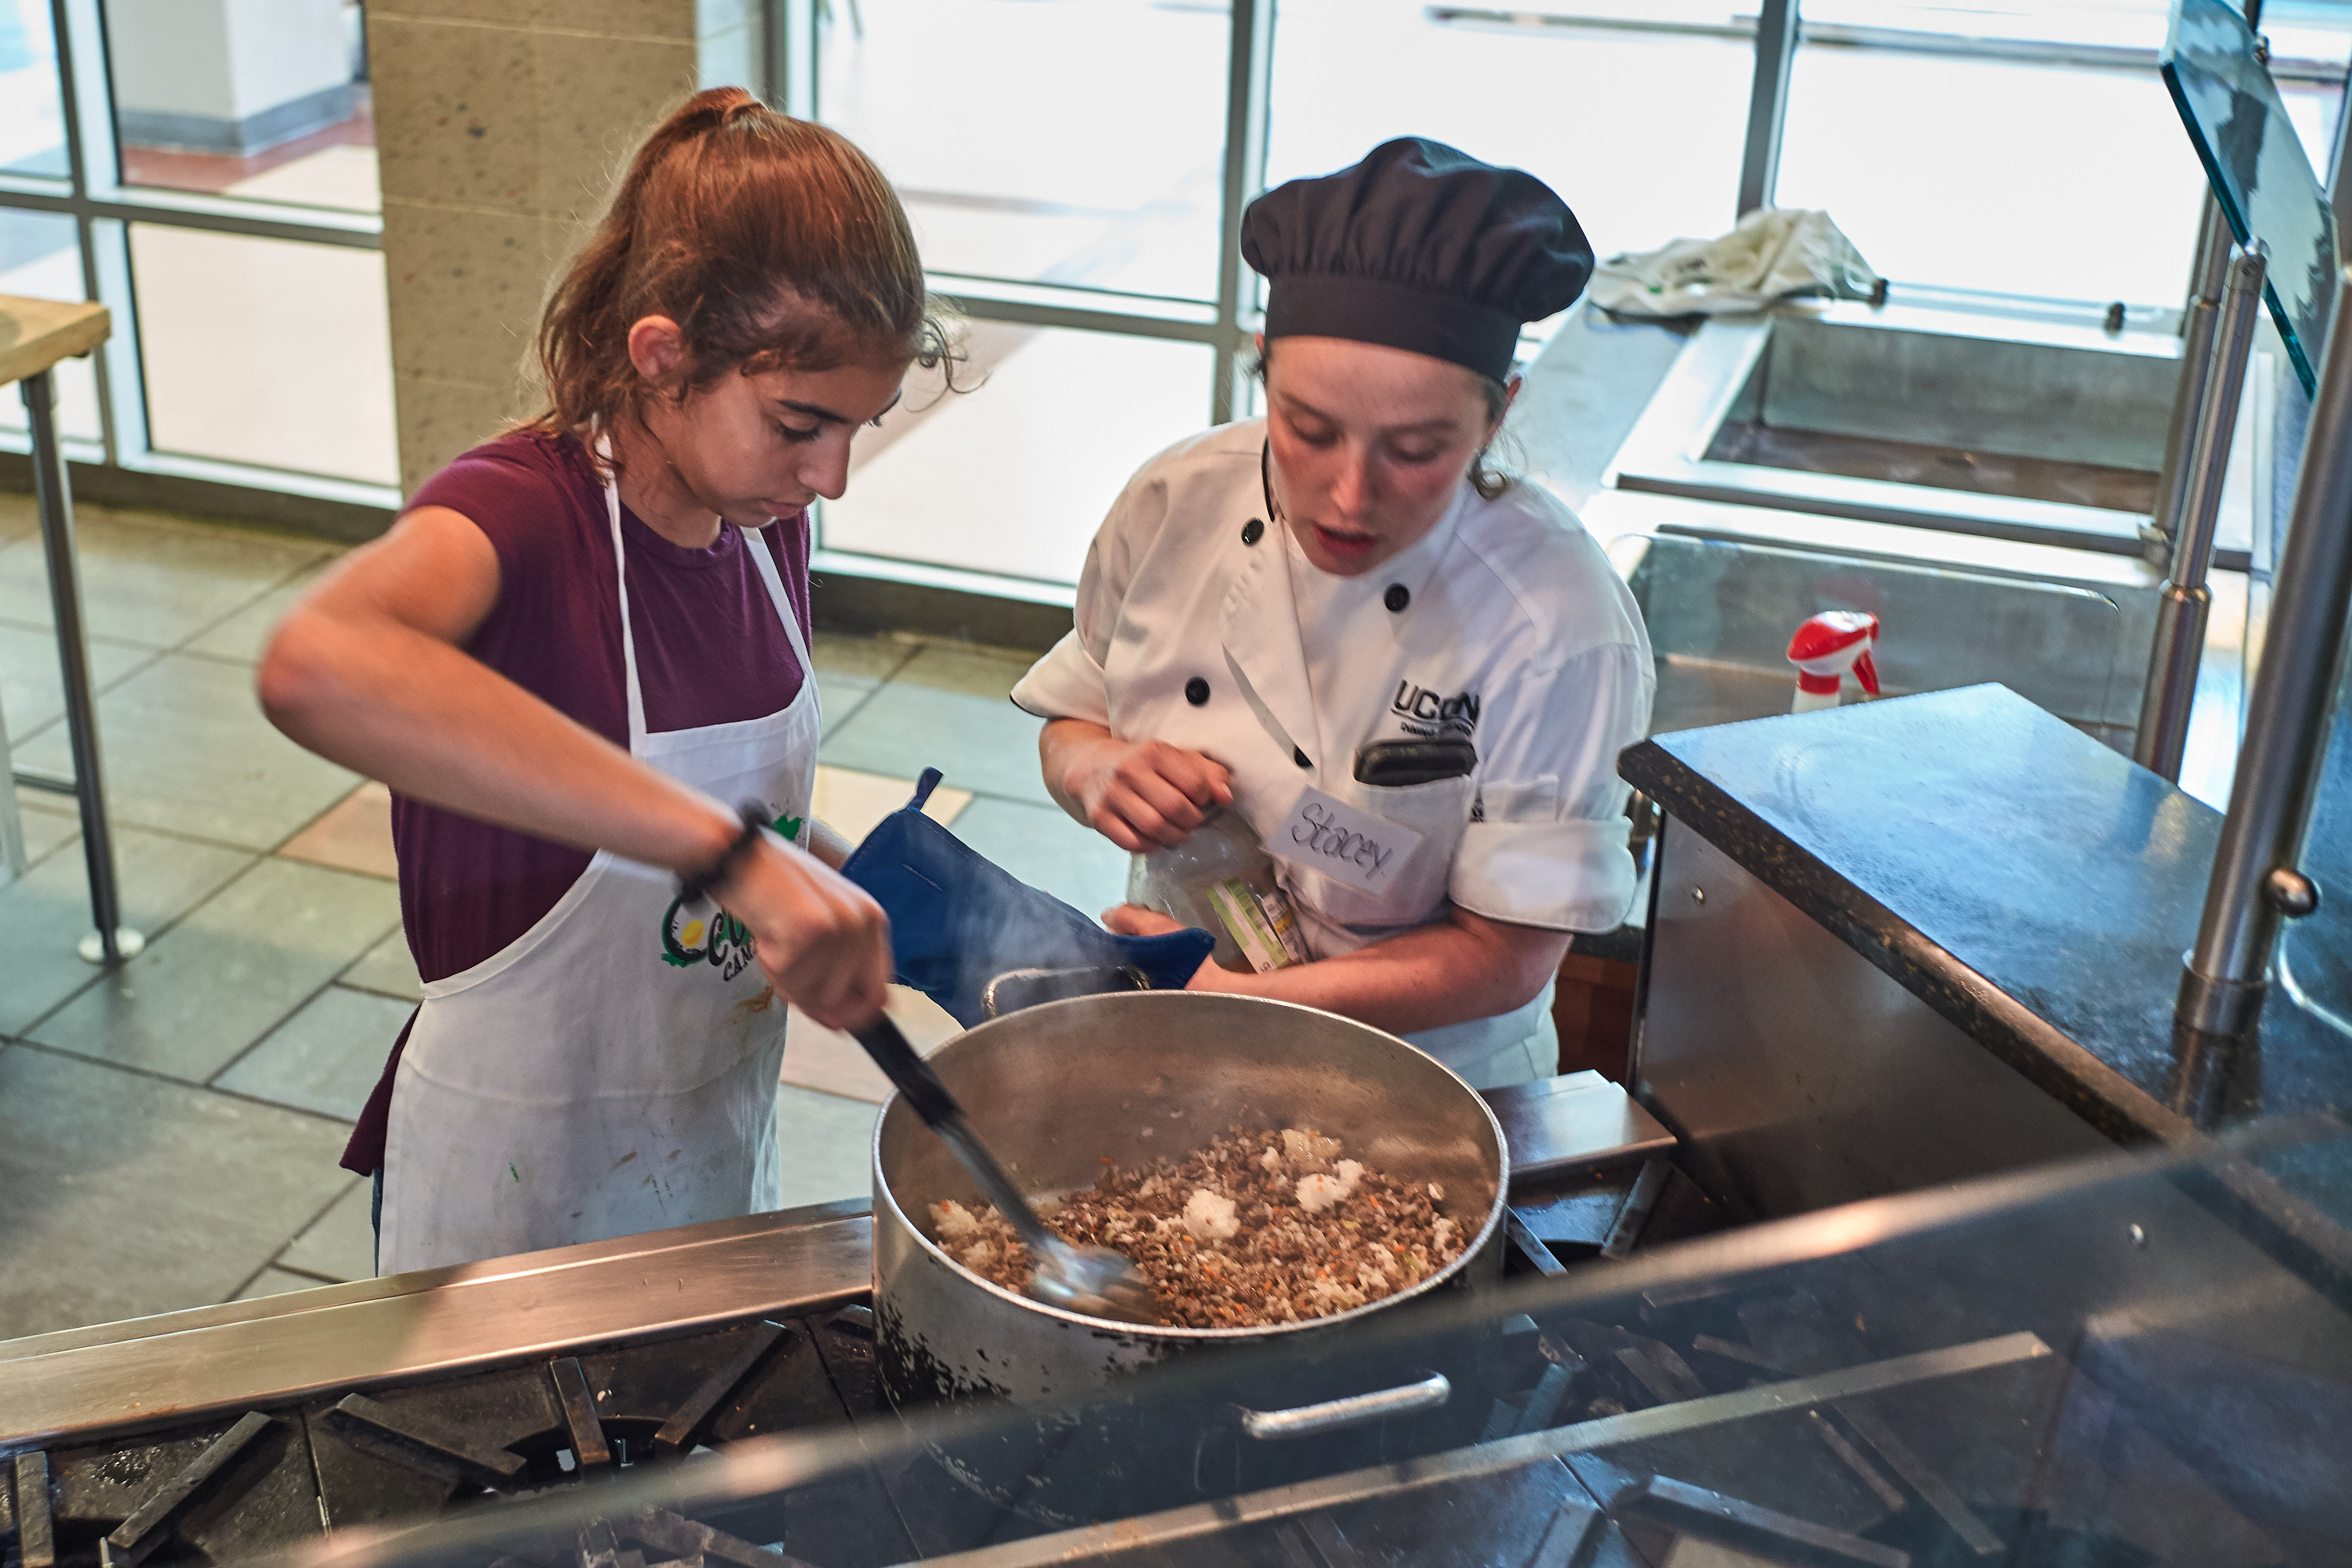 Scarlett Pauloski, 13, of Old Saybrook, left, and Chef Stacy Guitard season taco meat for a main dish during a competition held at the UCann Cook Camp at Gelfenbien Commons on July 18, 2019. (Peter Morenus/UConn Photo)